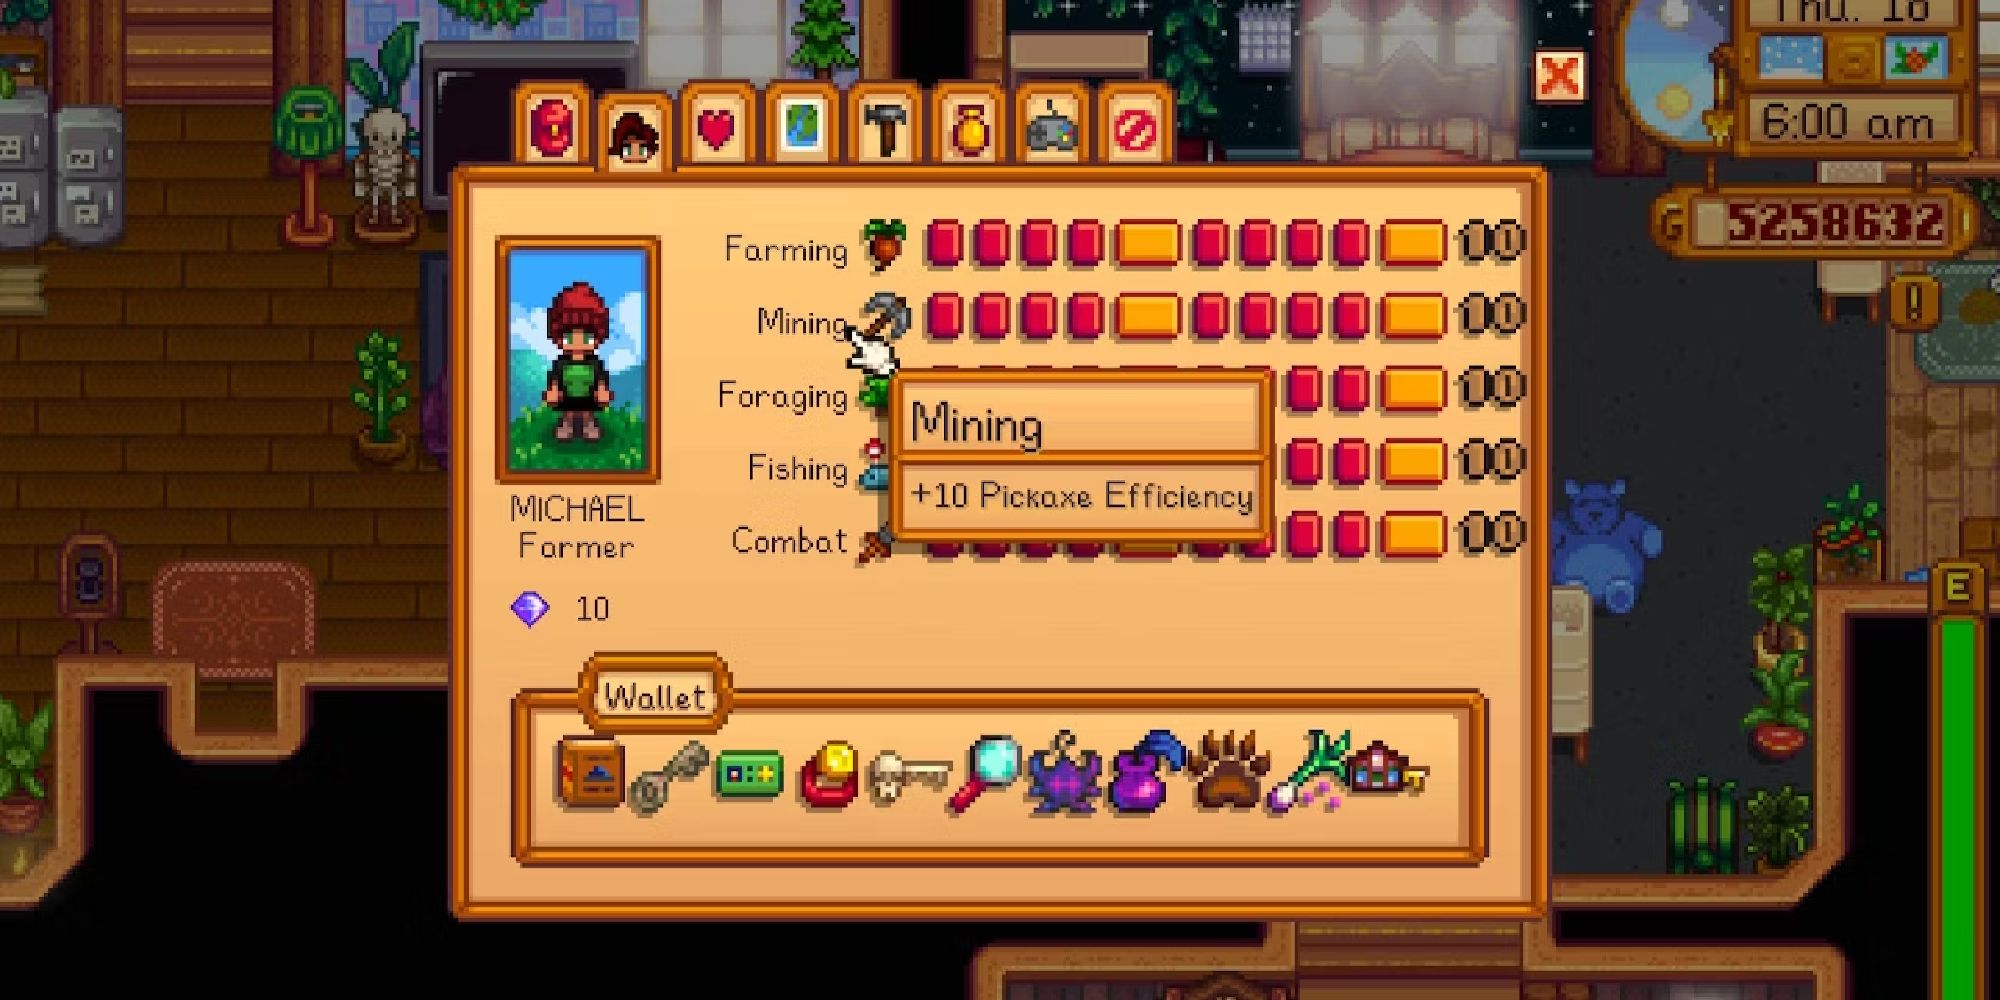 stardew valley skill menu with the mining skill selected